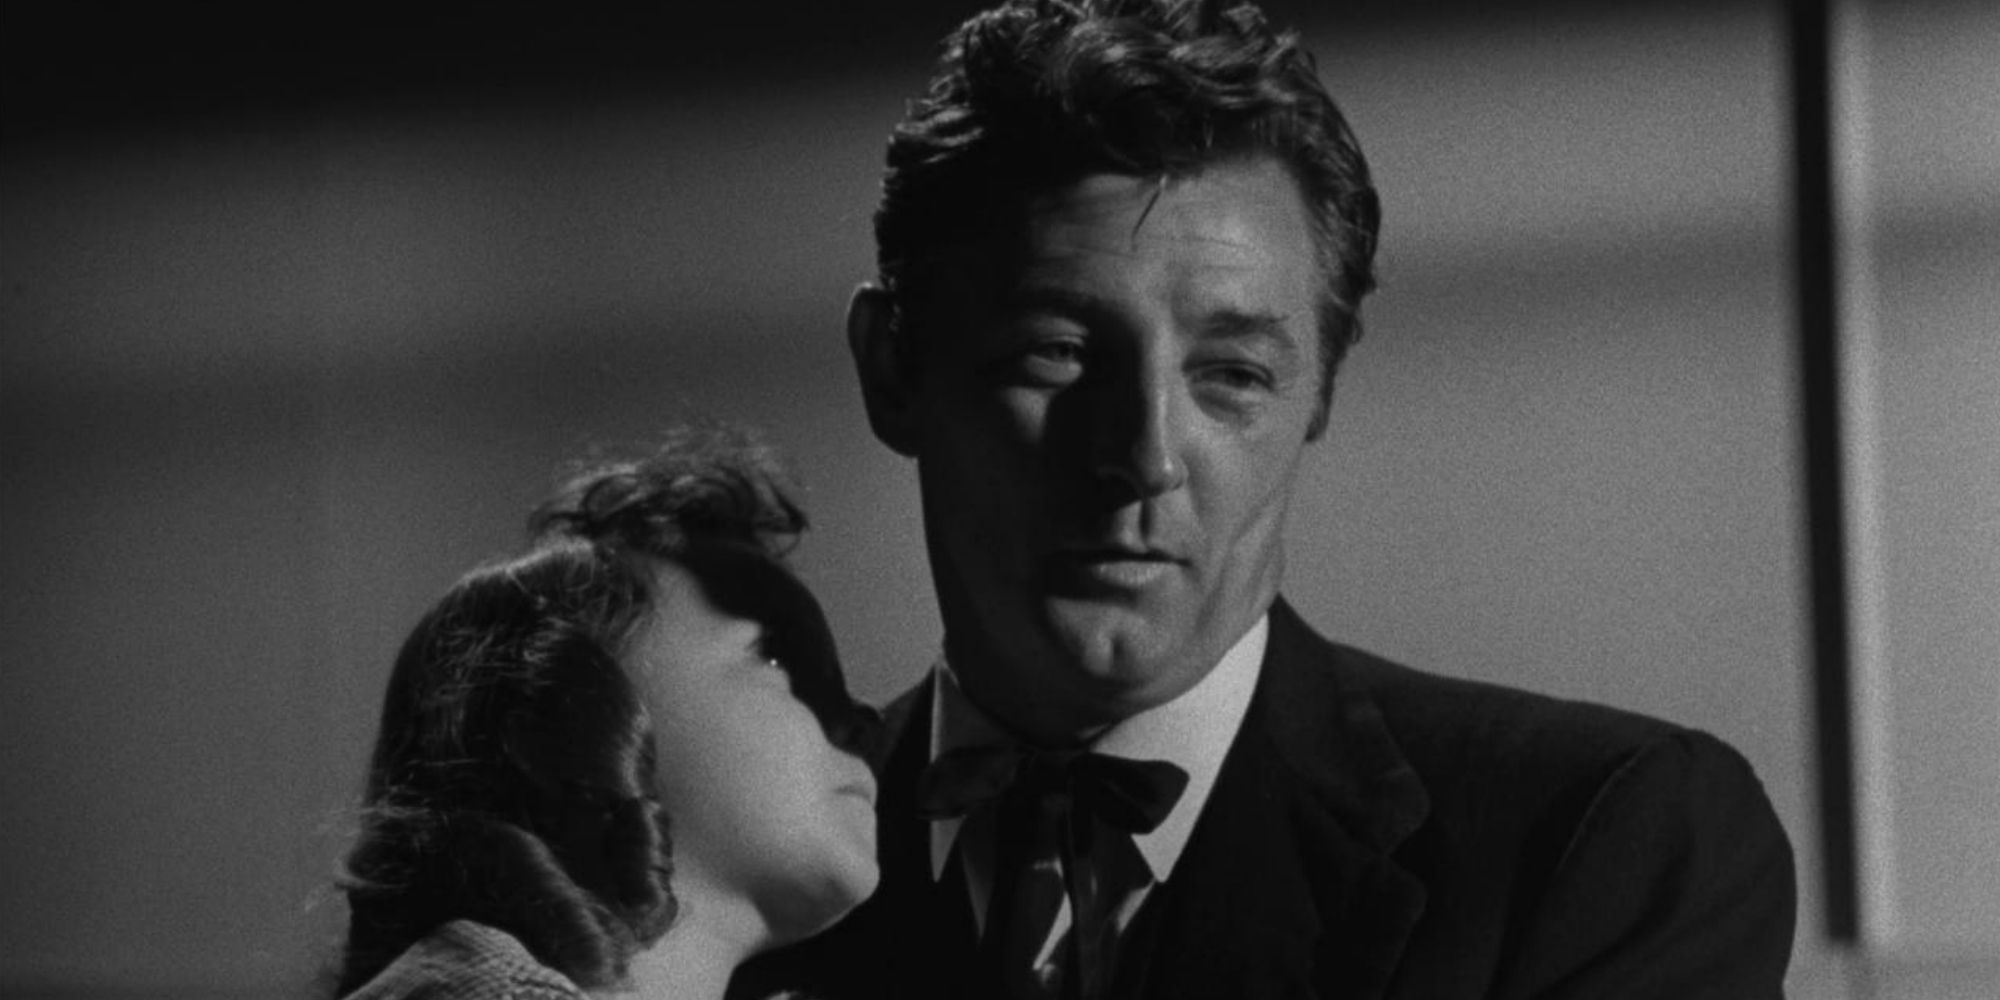 Harry Powell (Robert Mitchum) from 'The Night of the Hunter' 